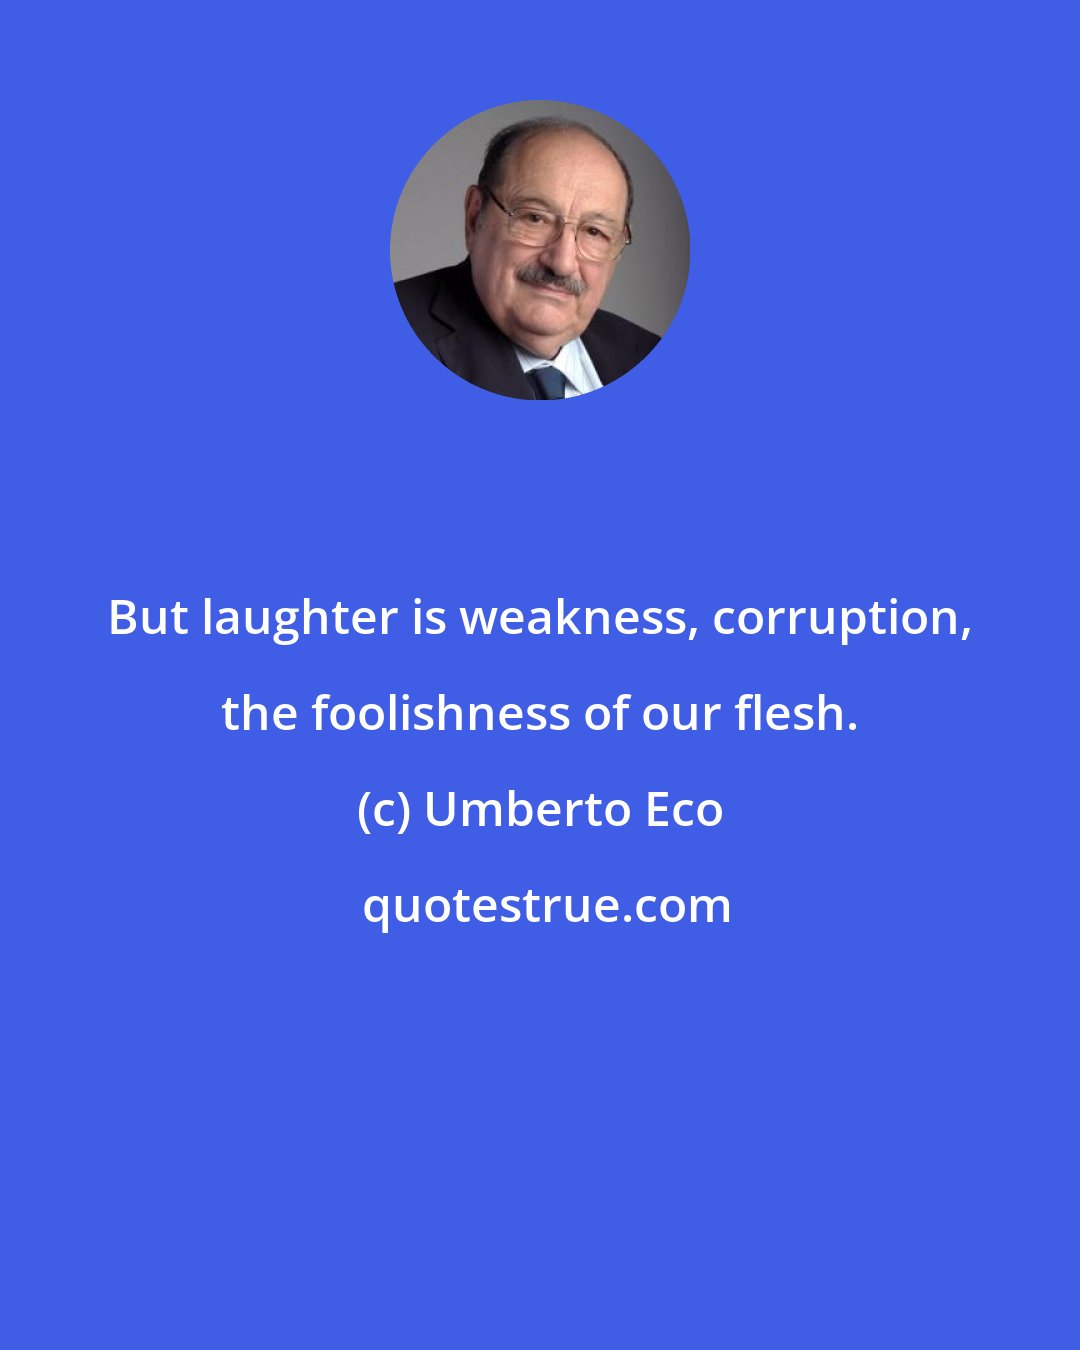 Umberto Eco: But laughter is weakness, corruption, the foolishness of our flesh.